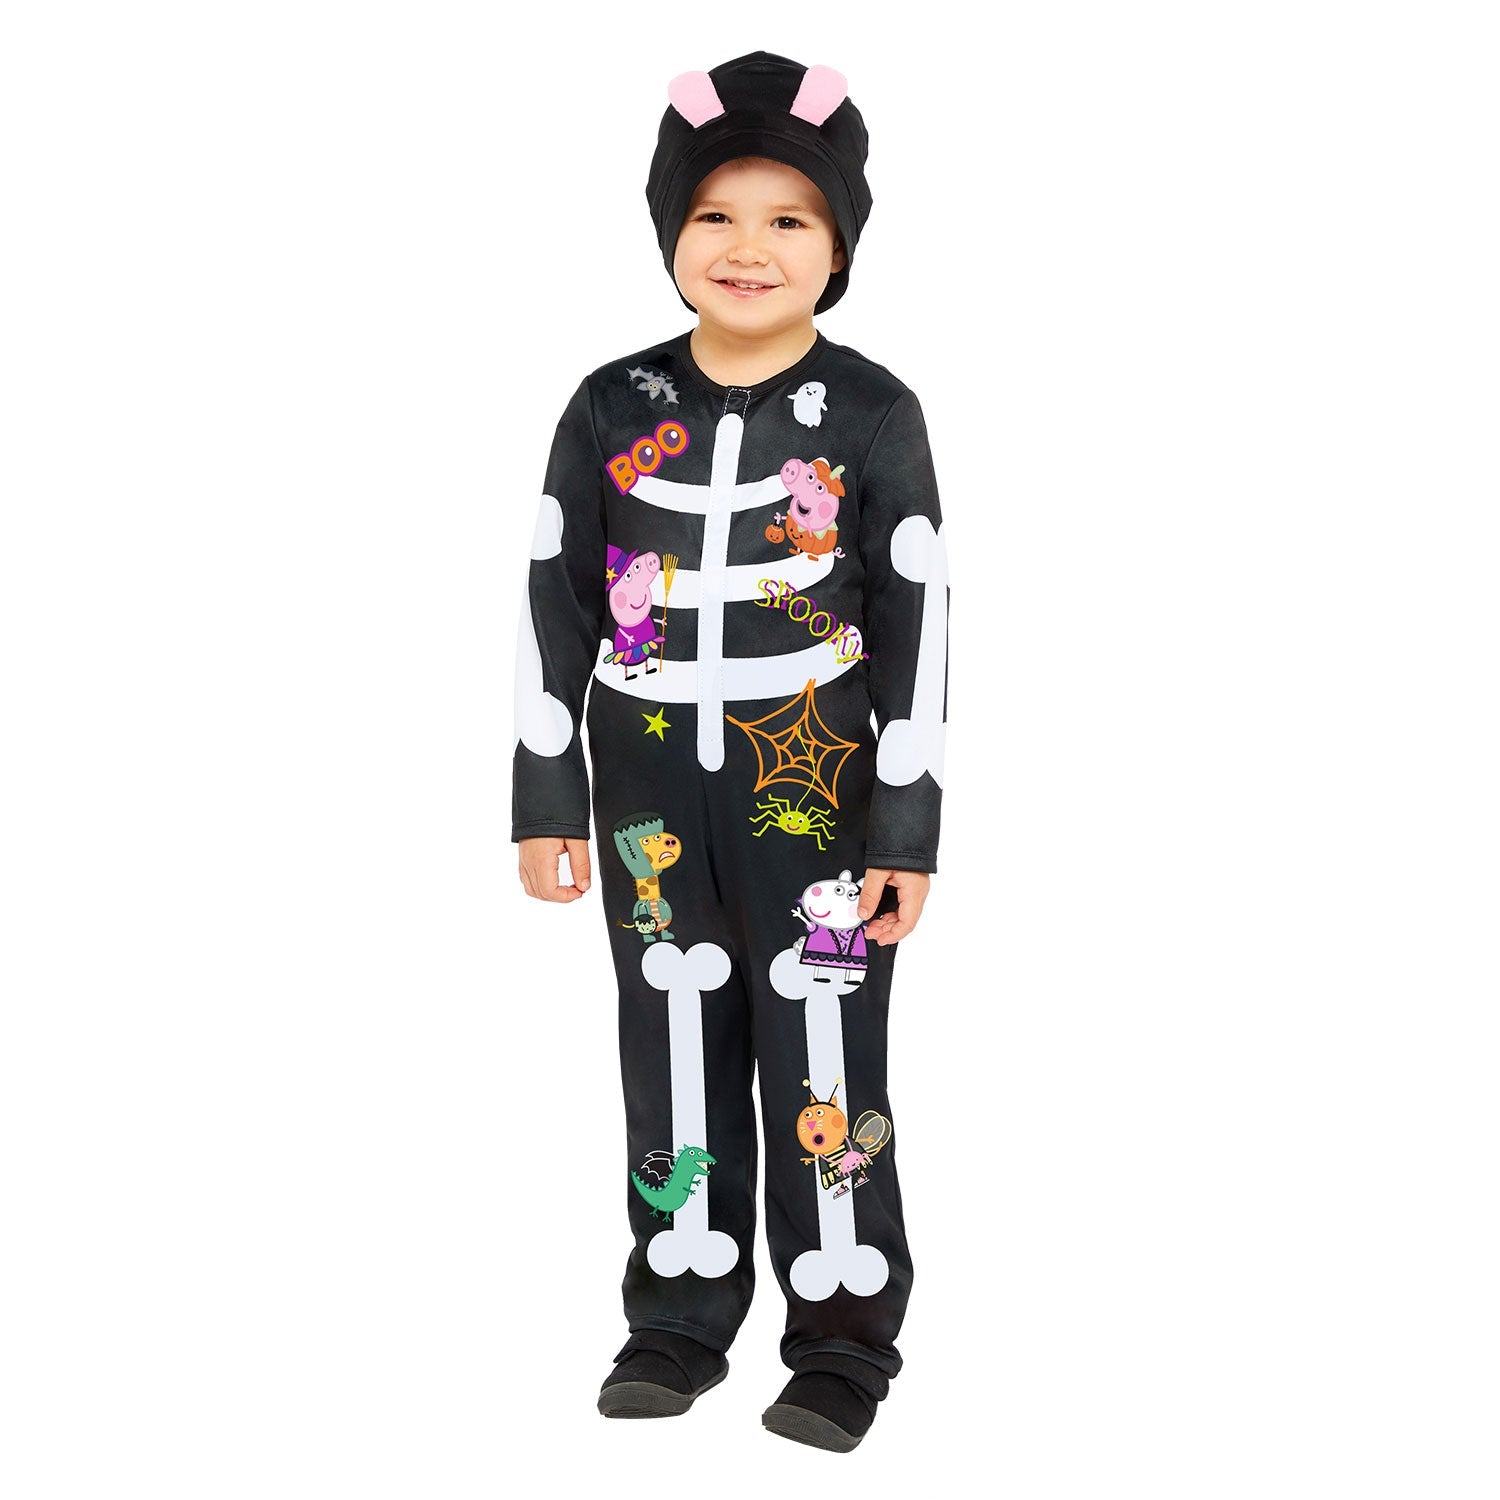 Peppa Pig Skeleton Costume includes jumpsuit and hat